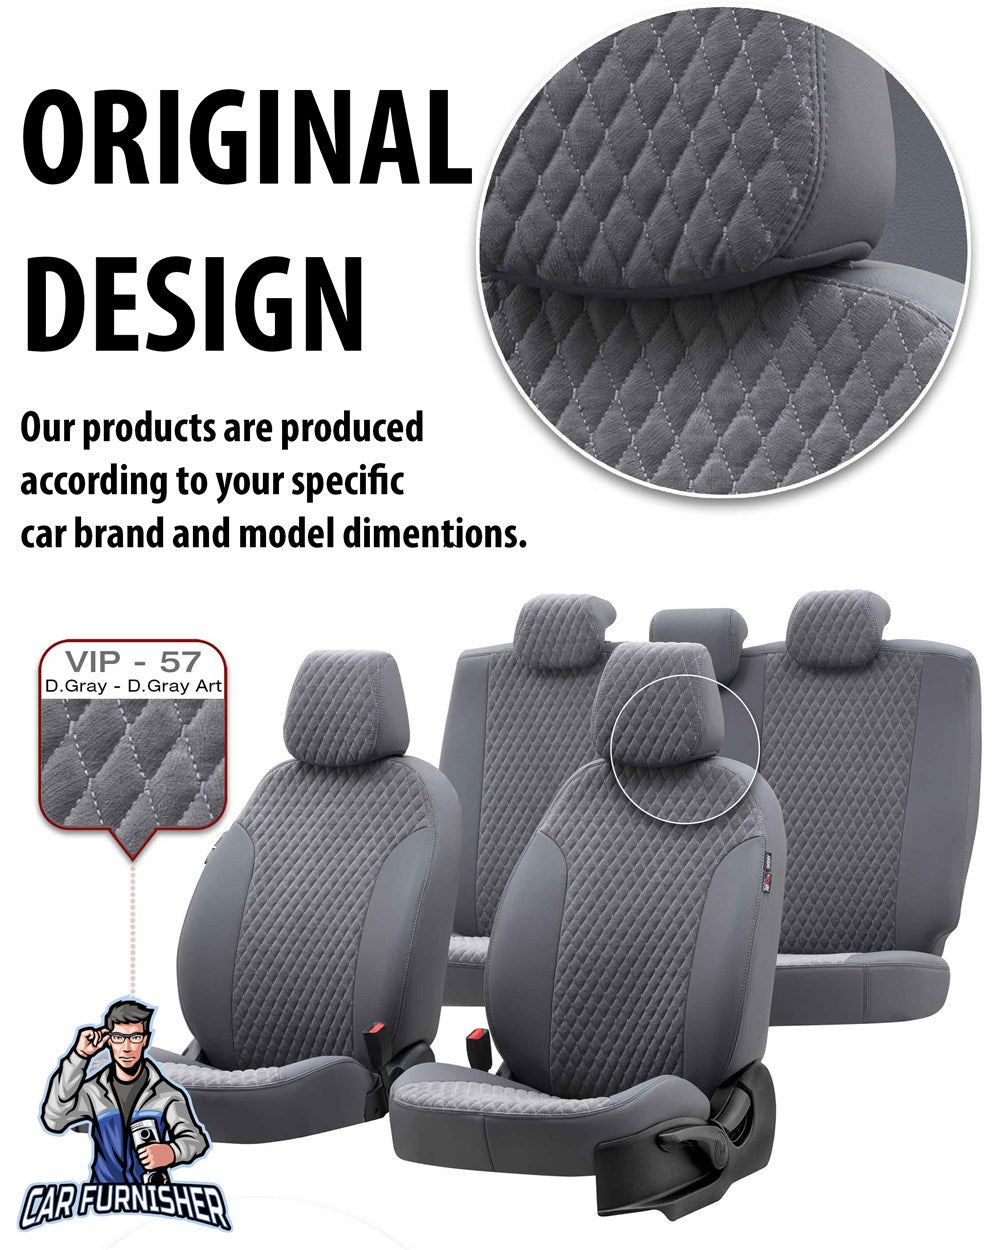 Fiat Fiorino Seat Covers Amsterdam Foal Feather Design Smoked Black Leather & Foal Feather